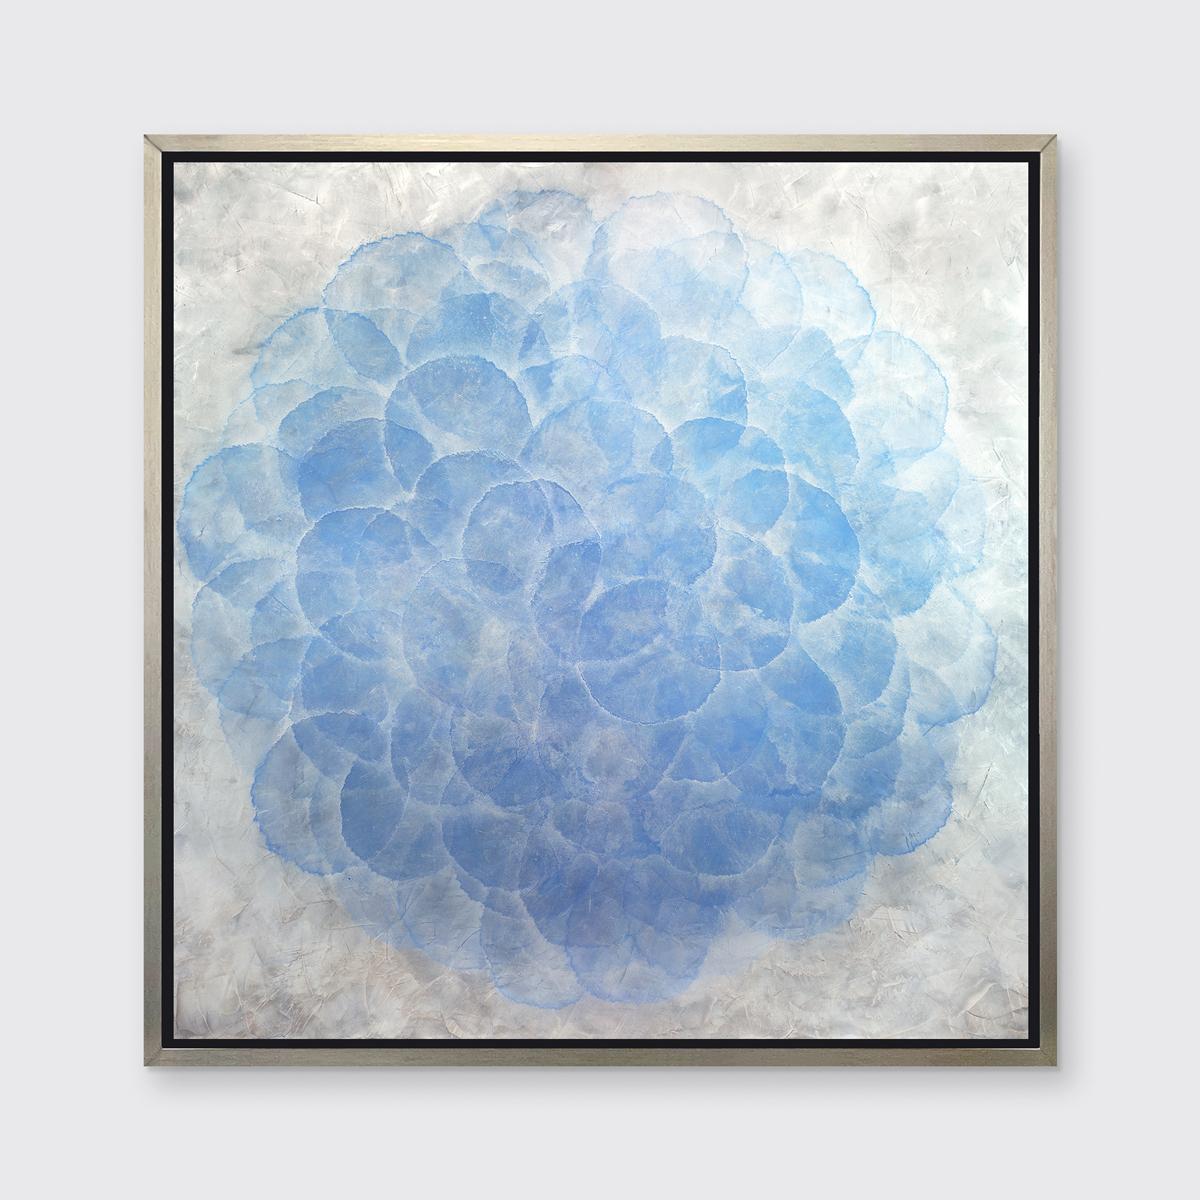 Roger Mudre Abstract Print - "Dichondra, " Framed Limited Edition Giclee Print, 40" x 40"